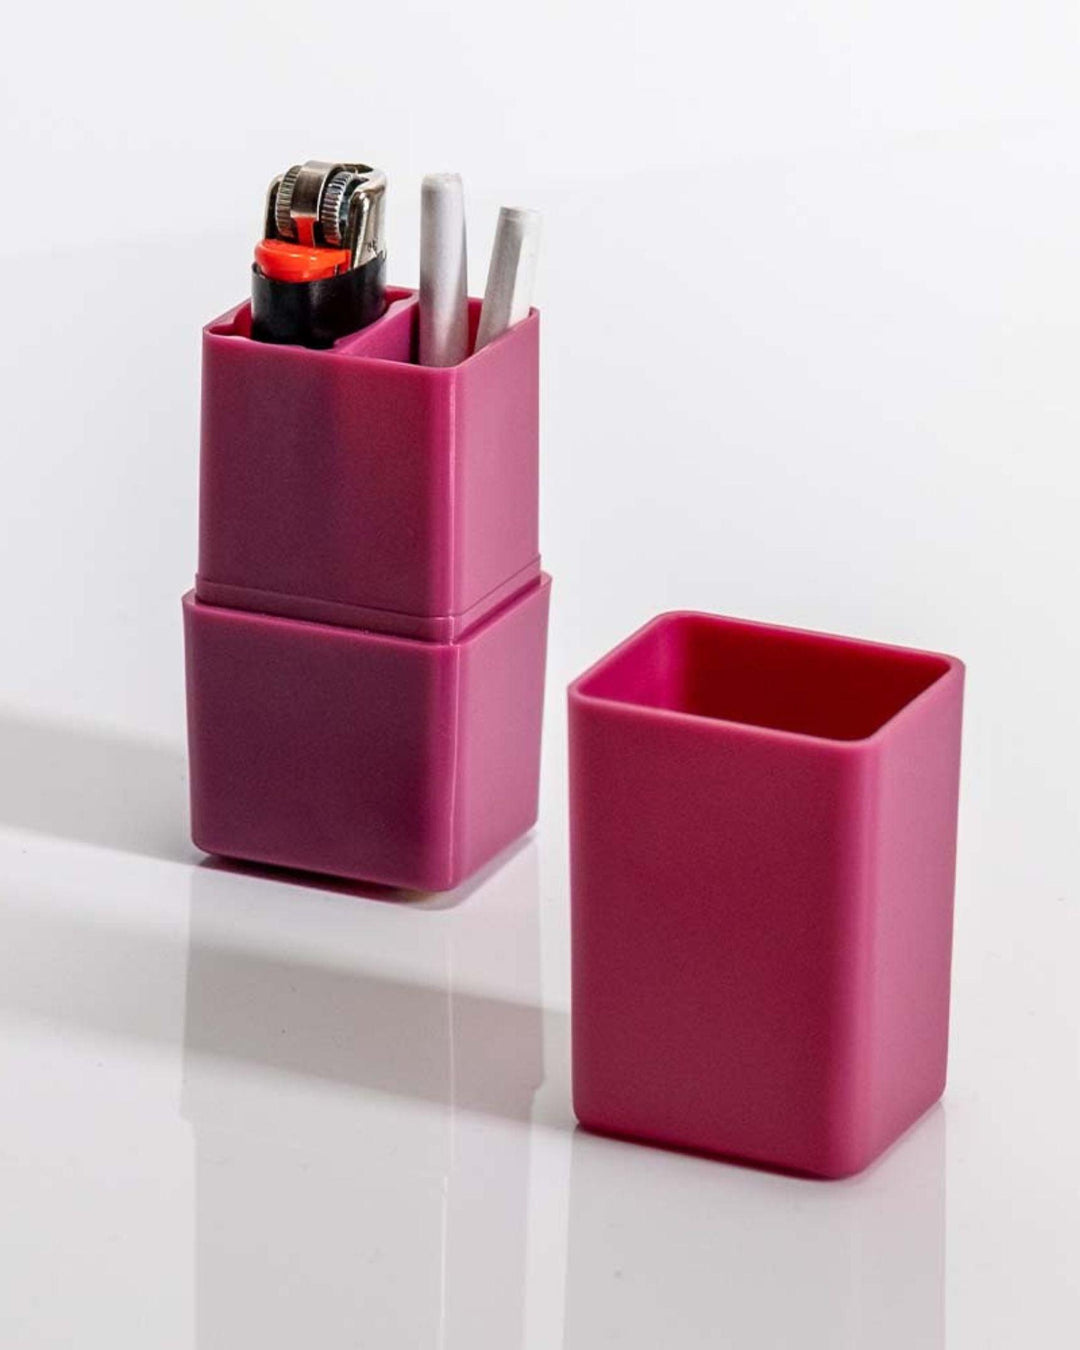 Cute pink smell proof joint storage container.